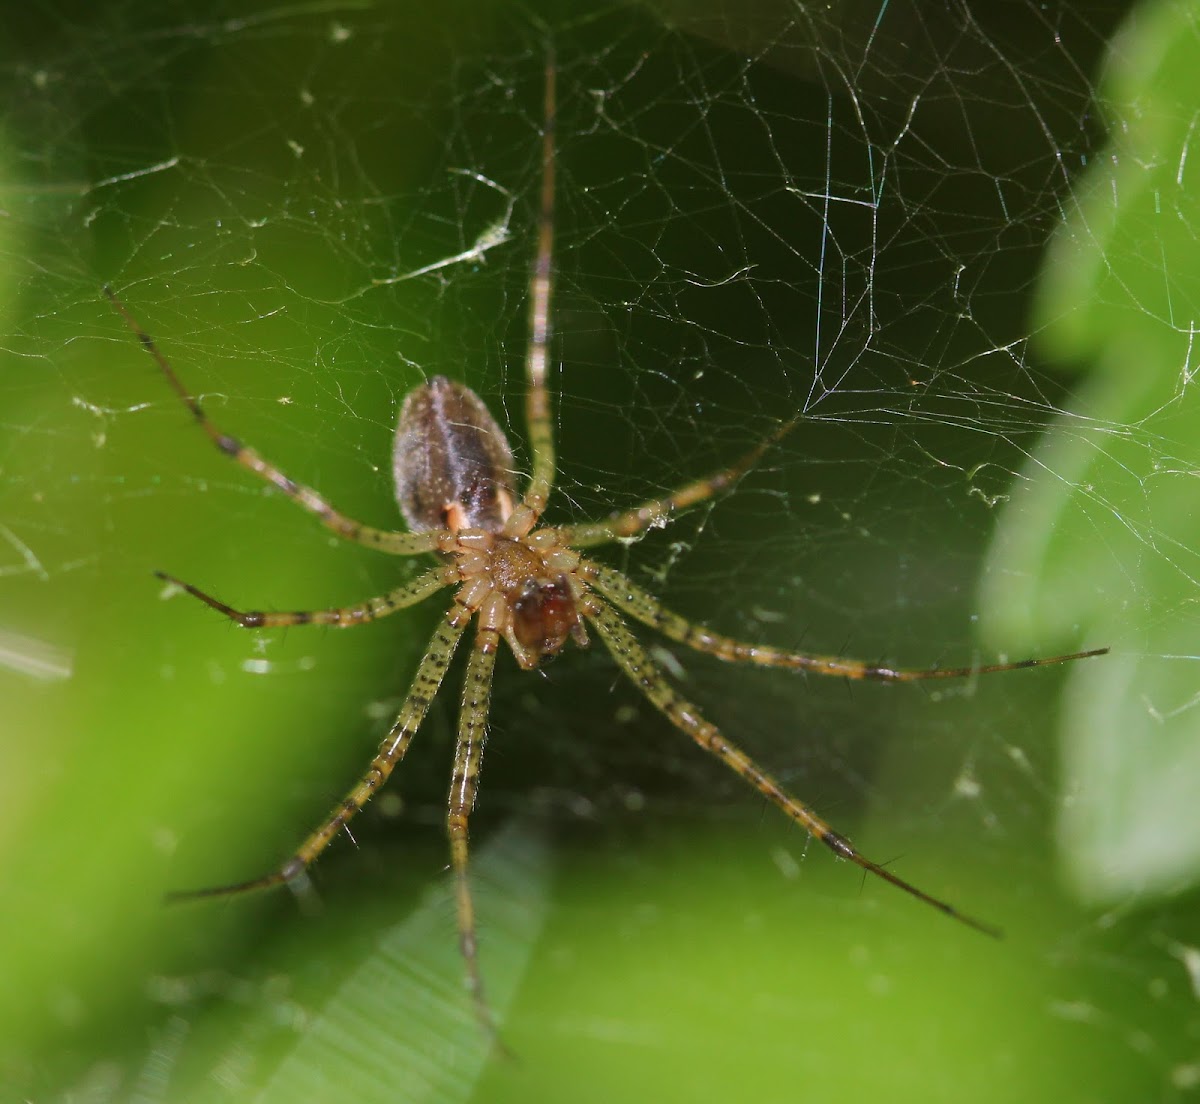 unknown spider, ventral view only